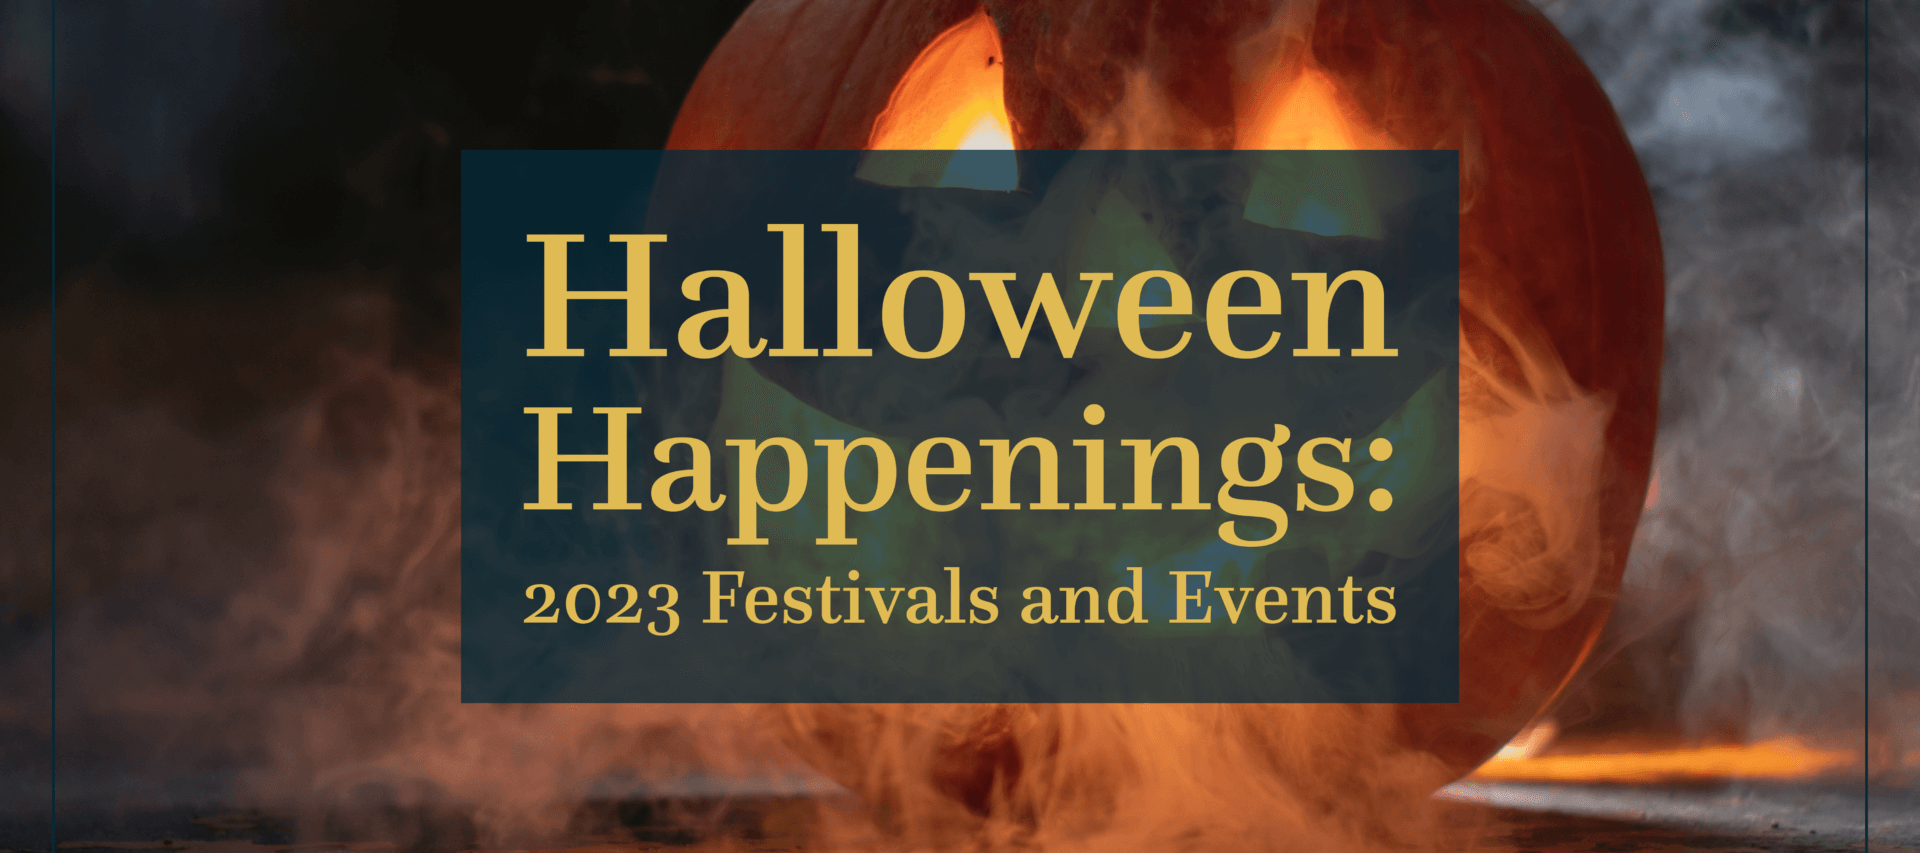 Halloween Happenings: 2023 Festivals and Events